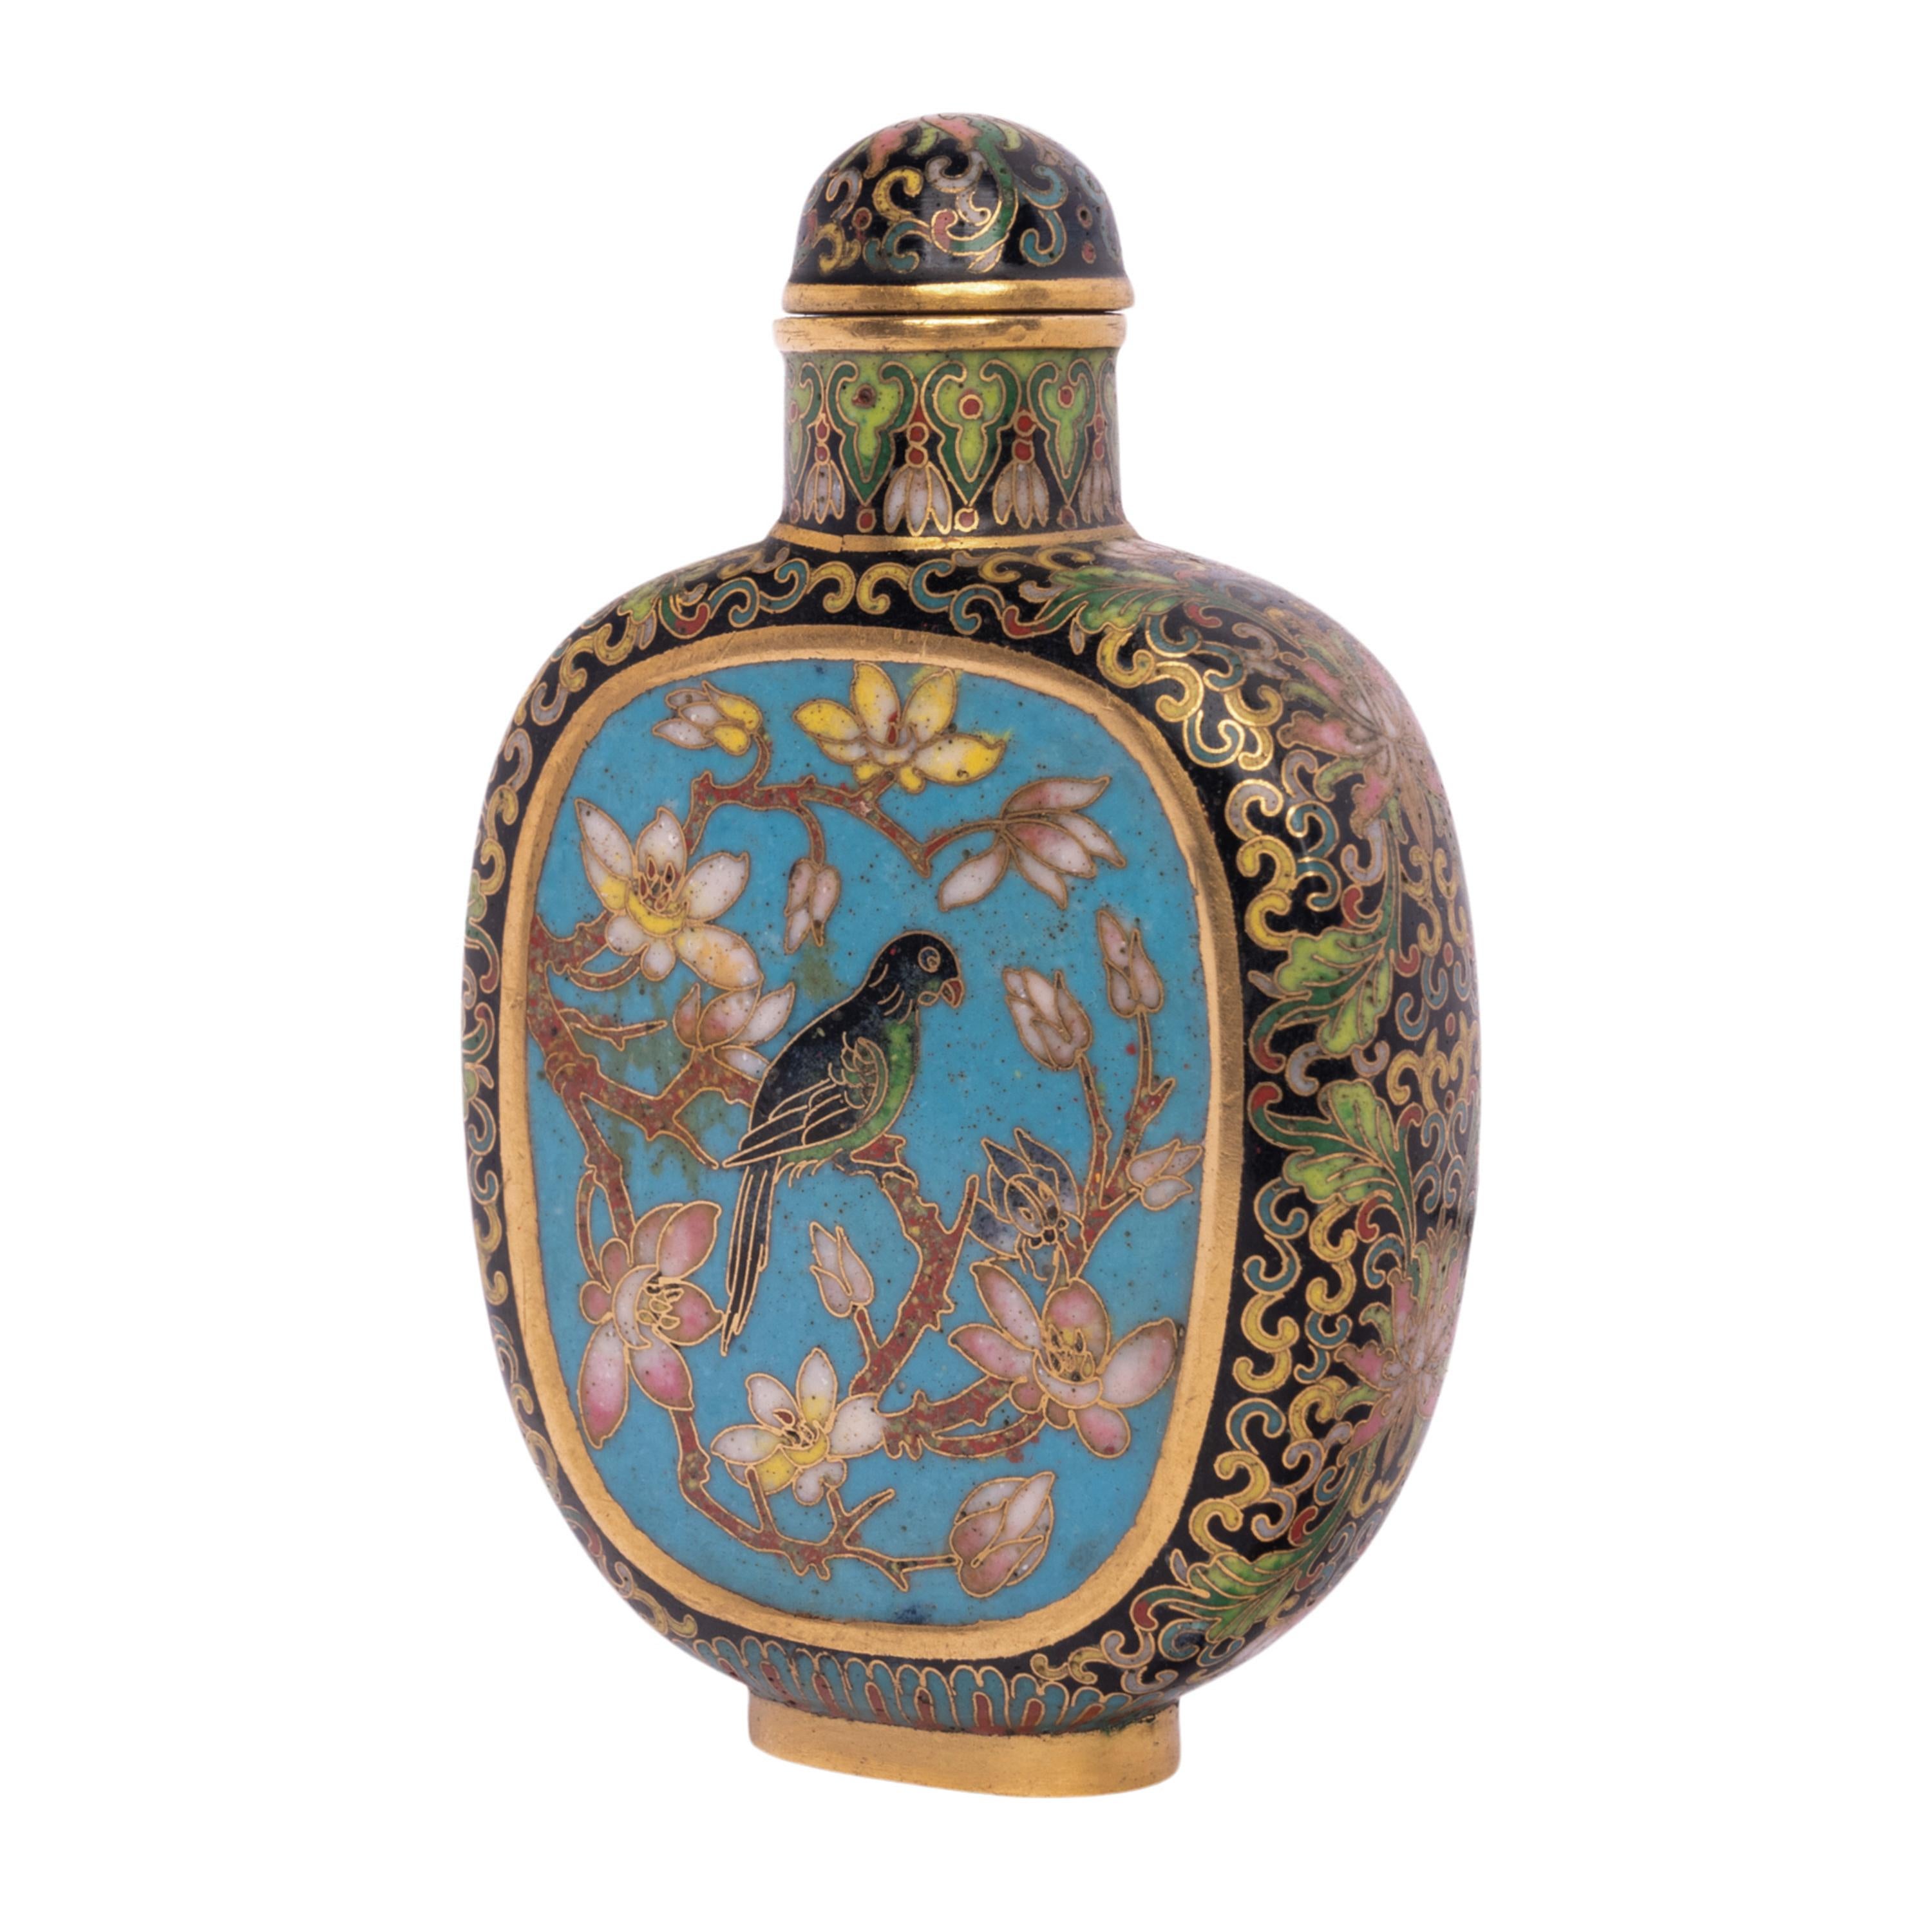 A fine & rare antique Imperial Chinese Qing dynasty solid gold & cloisonne enamel snuff bottle, Qianlong mark & period, 1736-1795, tests as 16k gold.
It is rare to find a cloisonné enamel snuff bottle with a Qianlong reign mark, and only a small